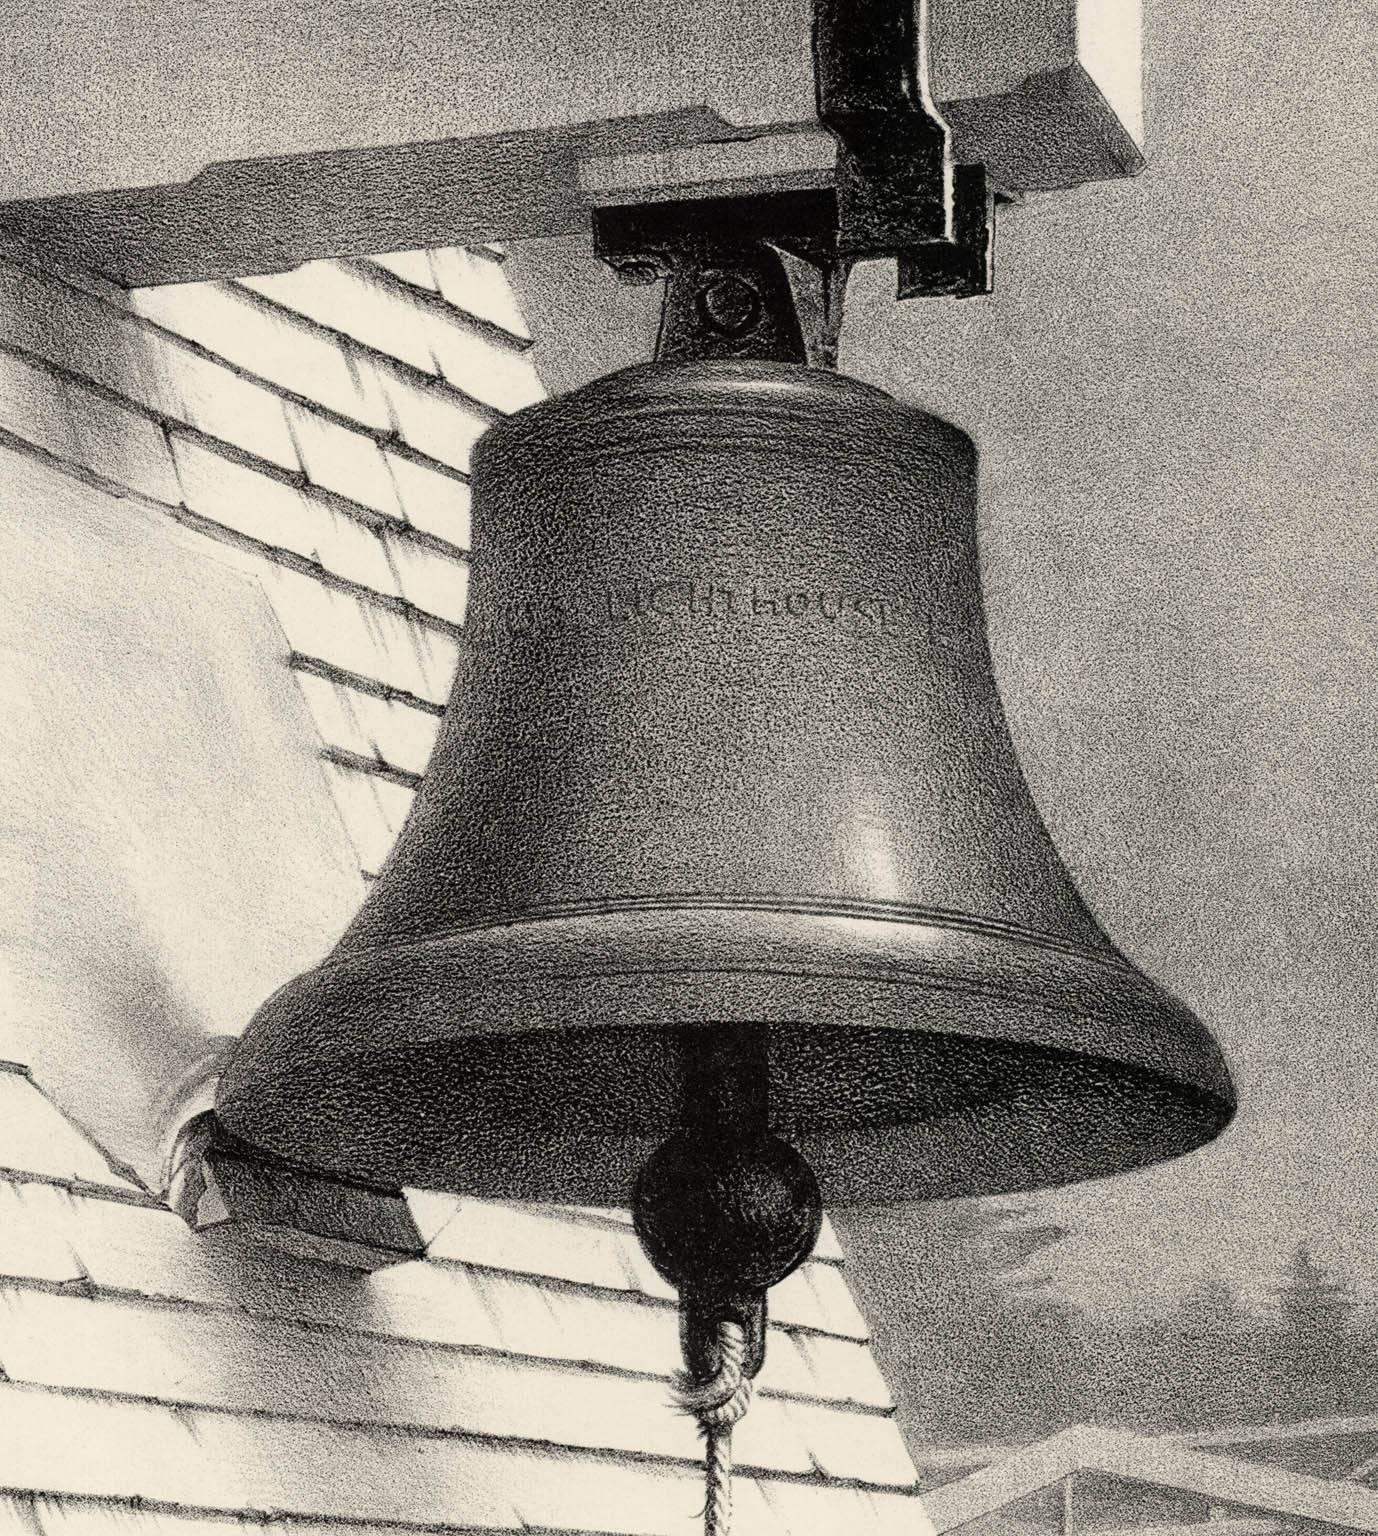 The Fog Bell. - American Realist Print by Stow Wengenroth